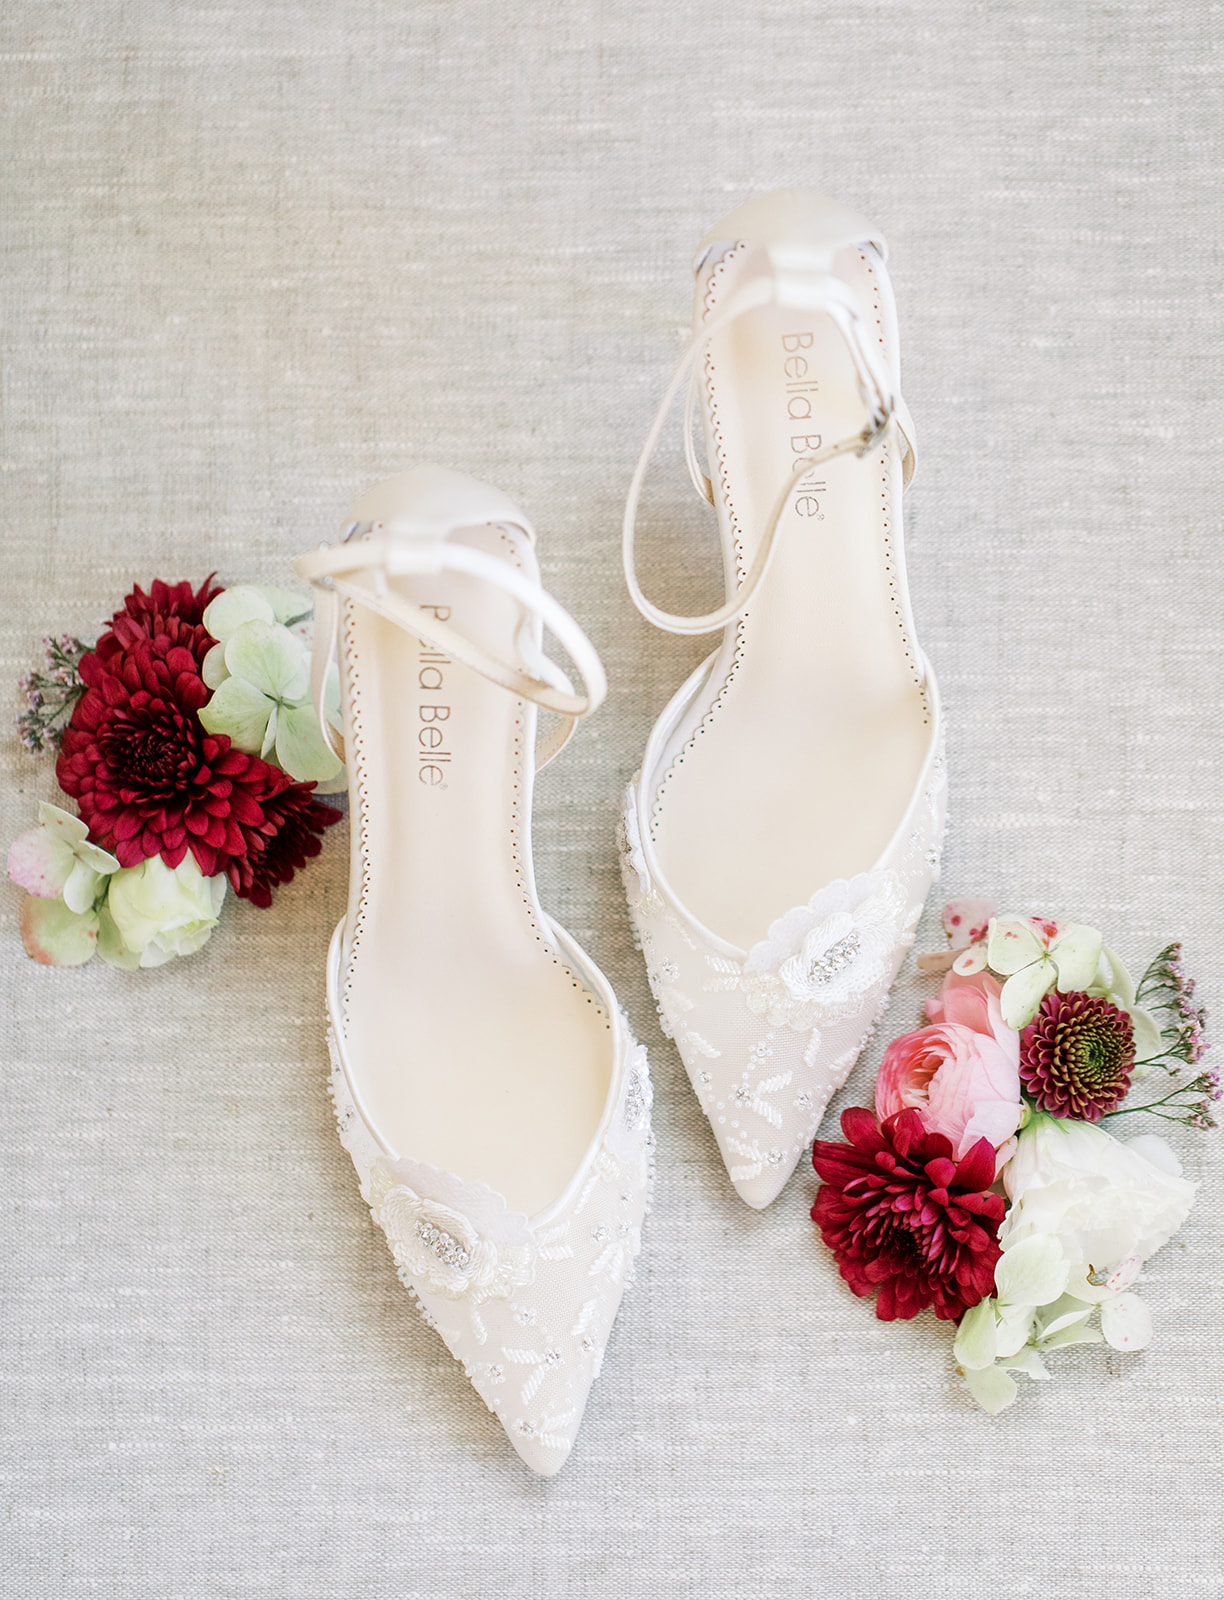 Stunning lace bridal shoes by Bella Belle Shoes captured by Jenelle Quigley Photography.